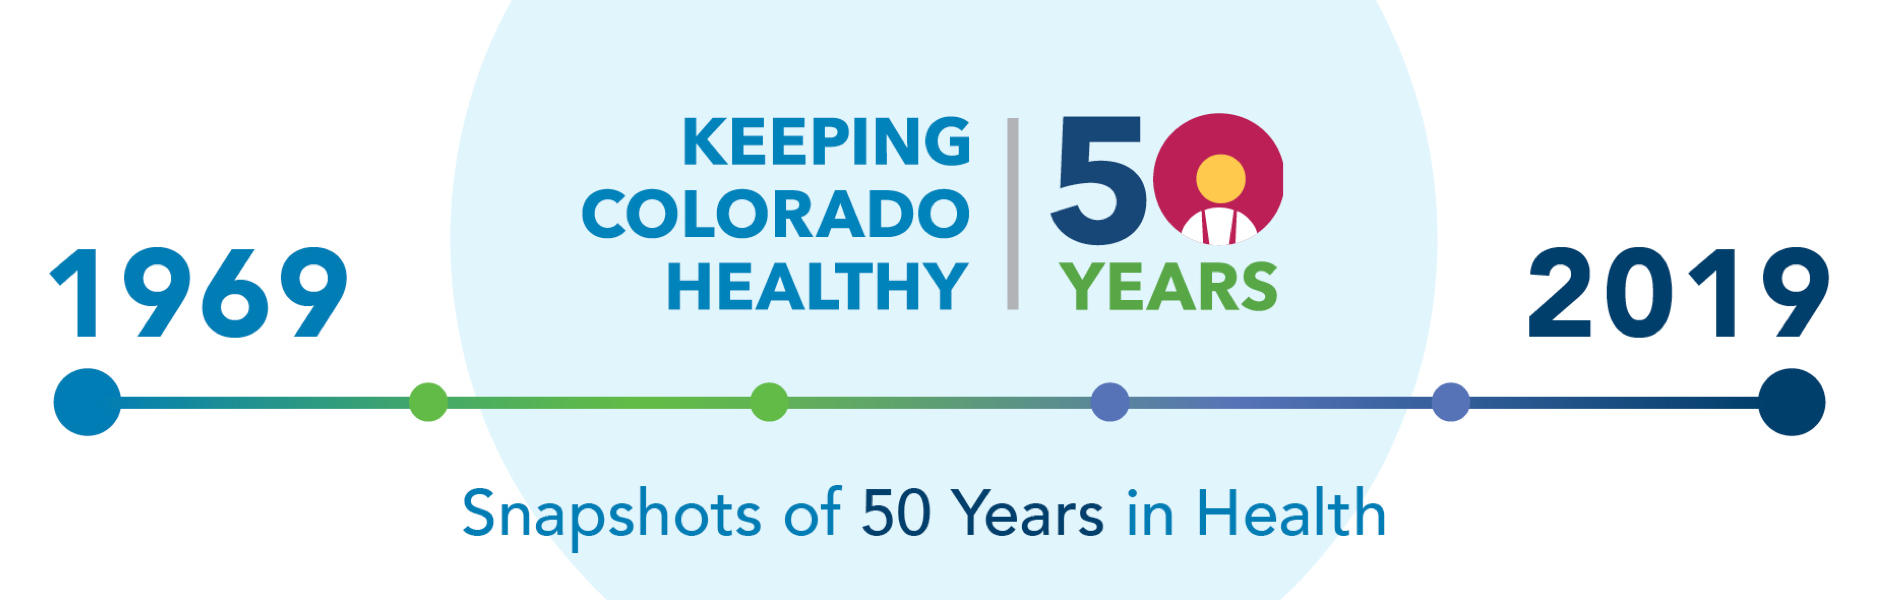 Keeping Colorado healthy for 50 years graphic